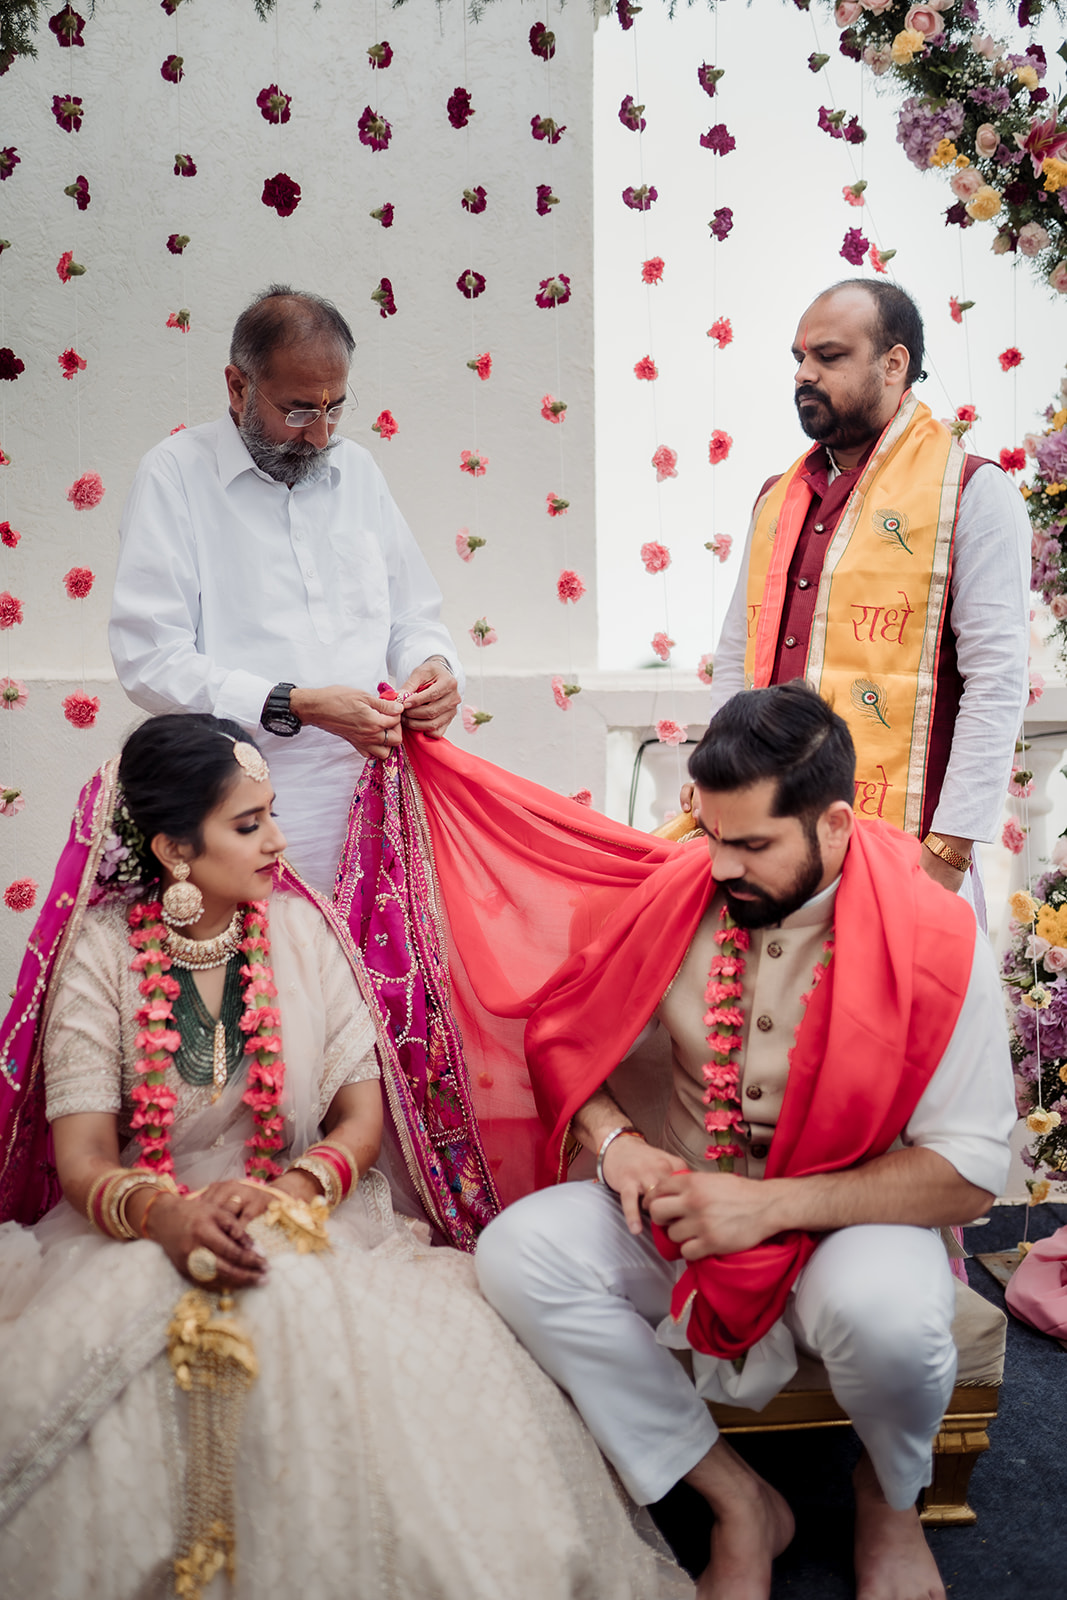 Rituals in focus: A snapshot of the rich cultural and emotional moments during wedding ceremonies